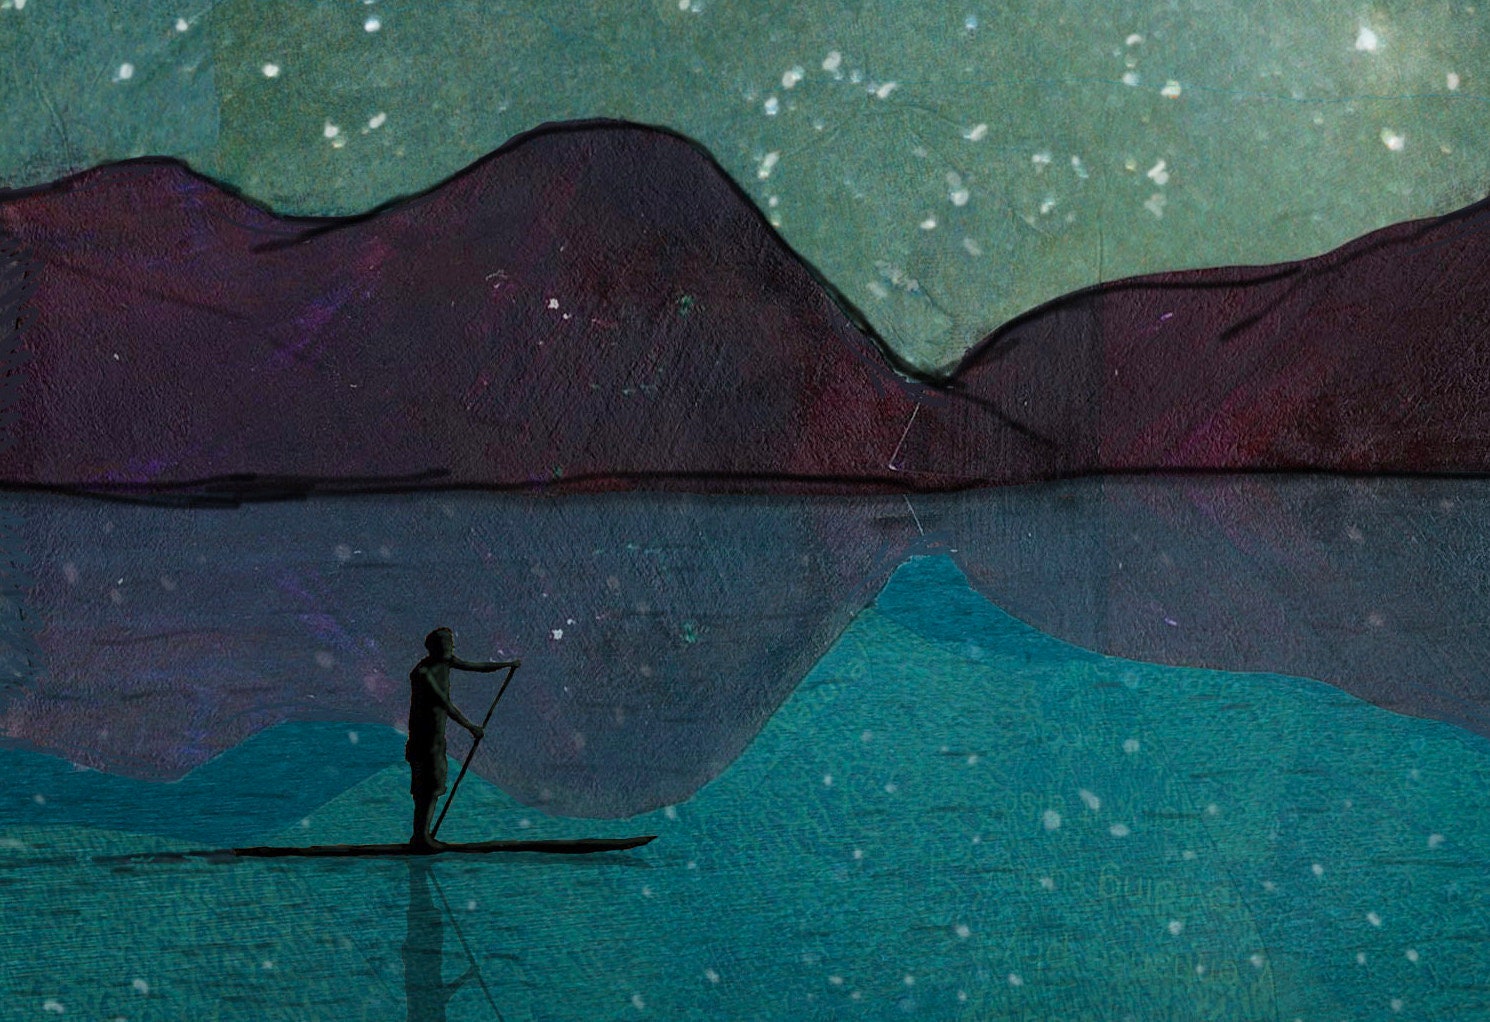 8x10 Art print of a Paper Collage of a person stand up paddling on a lake under the night sky stars - inspirational - Wall Art